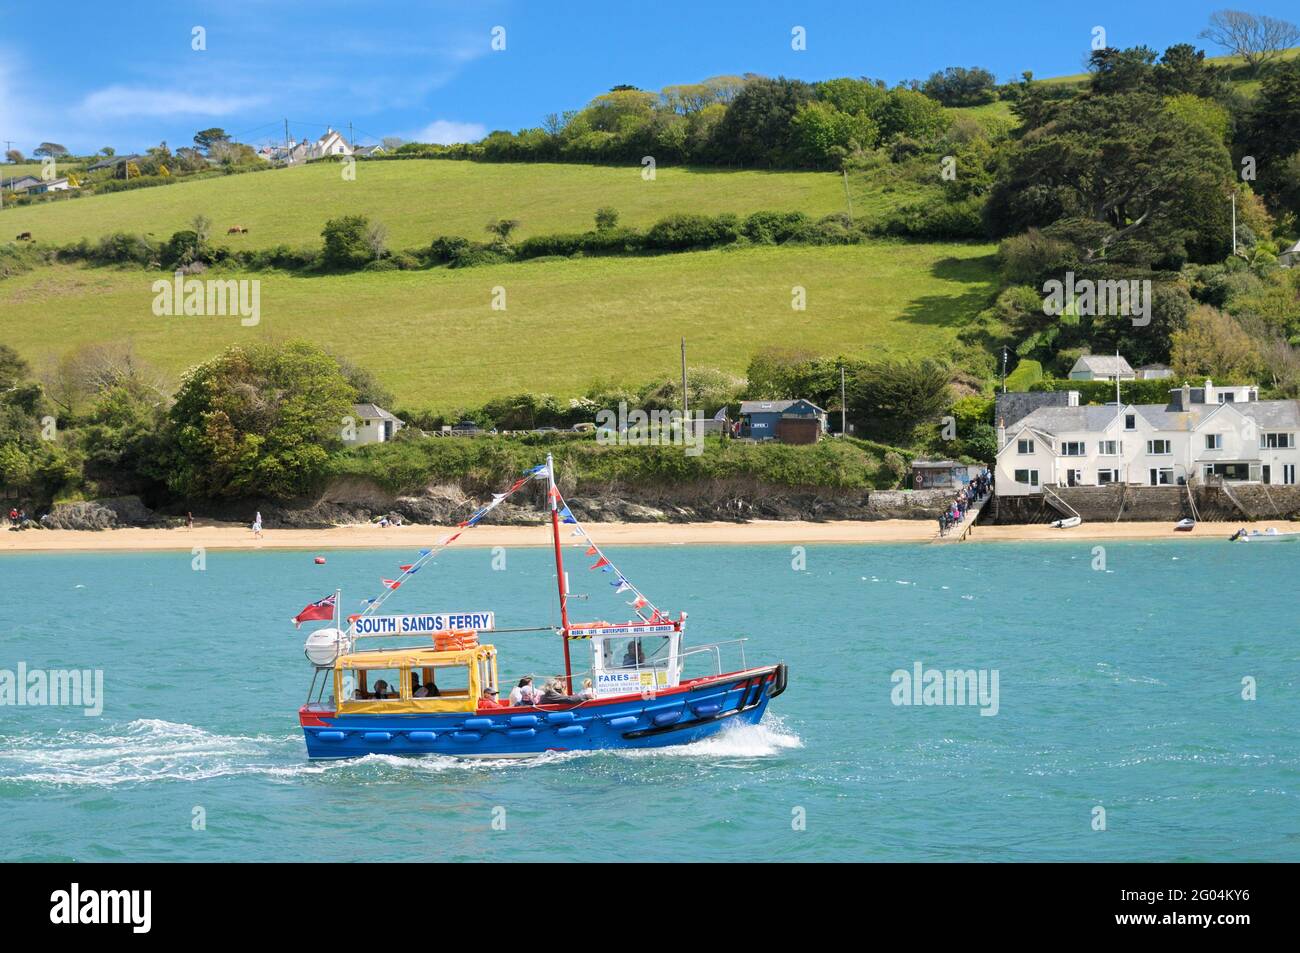 Tourists on the South Sands ferry boat on the Kingsbridge Estuary with East Portlemouth beach in the background, Salcombe, Devon, England, UK Stock Photo